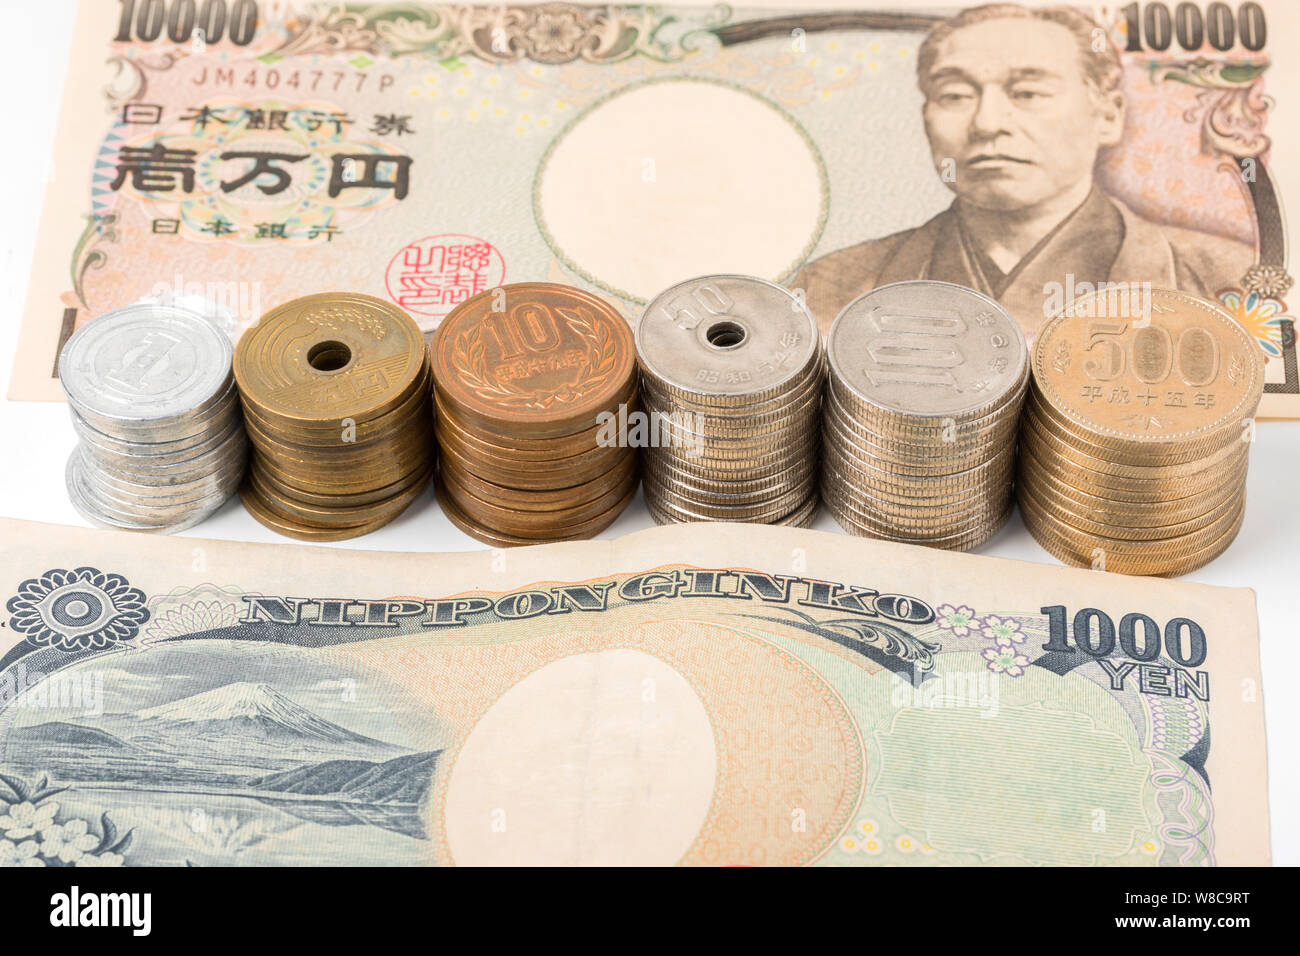 Japanese Yen Banknotes And Coins Currency Of Japan Finance Concept Stock Photo Alamy